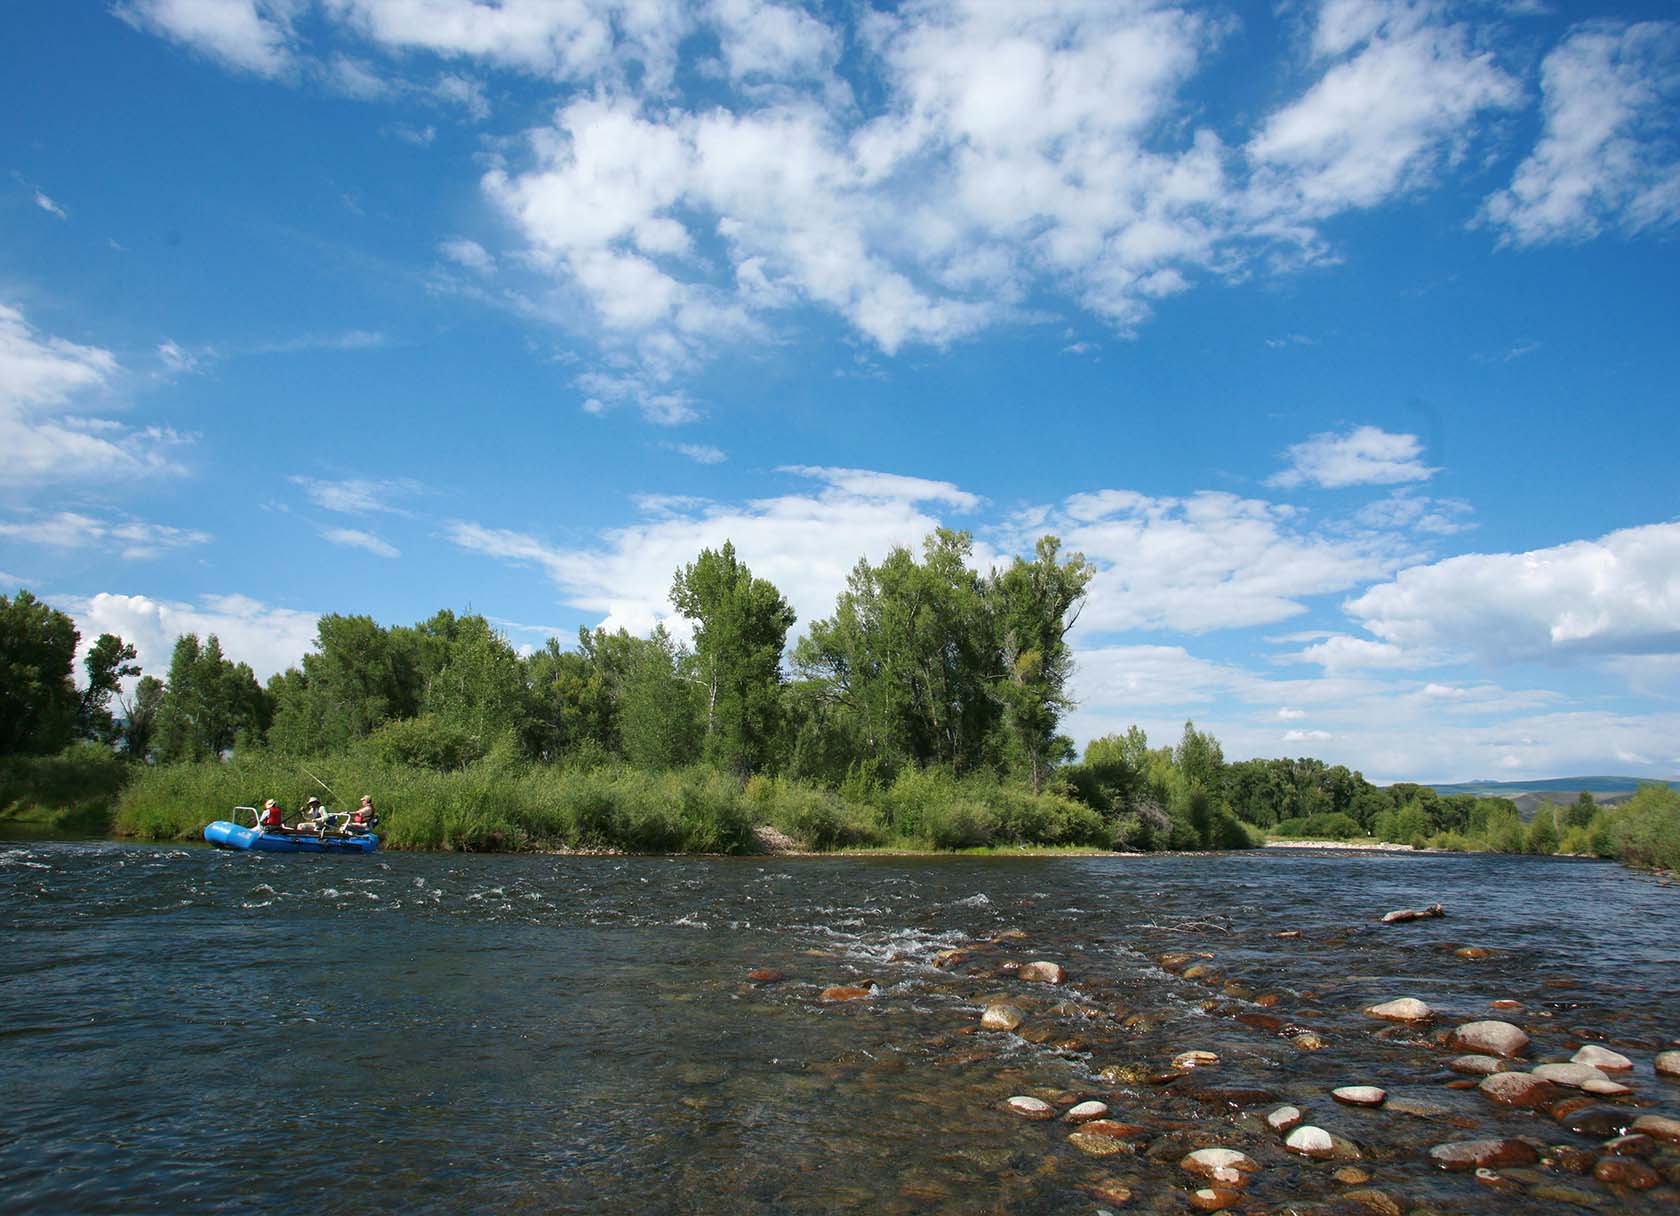 Prime Colorado Fly Fishing Conditions Have Arrived!